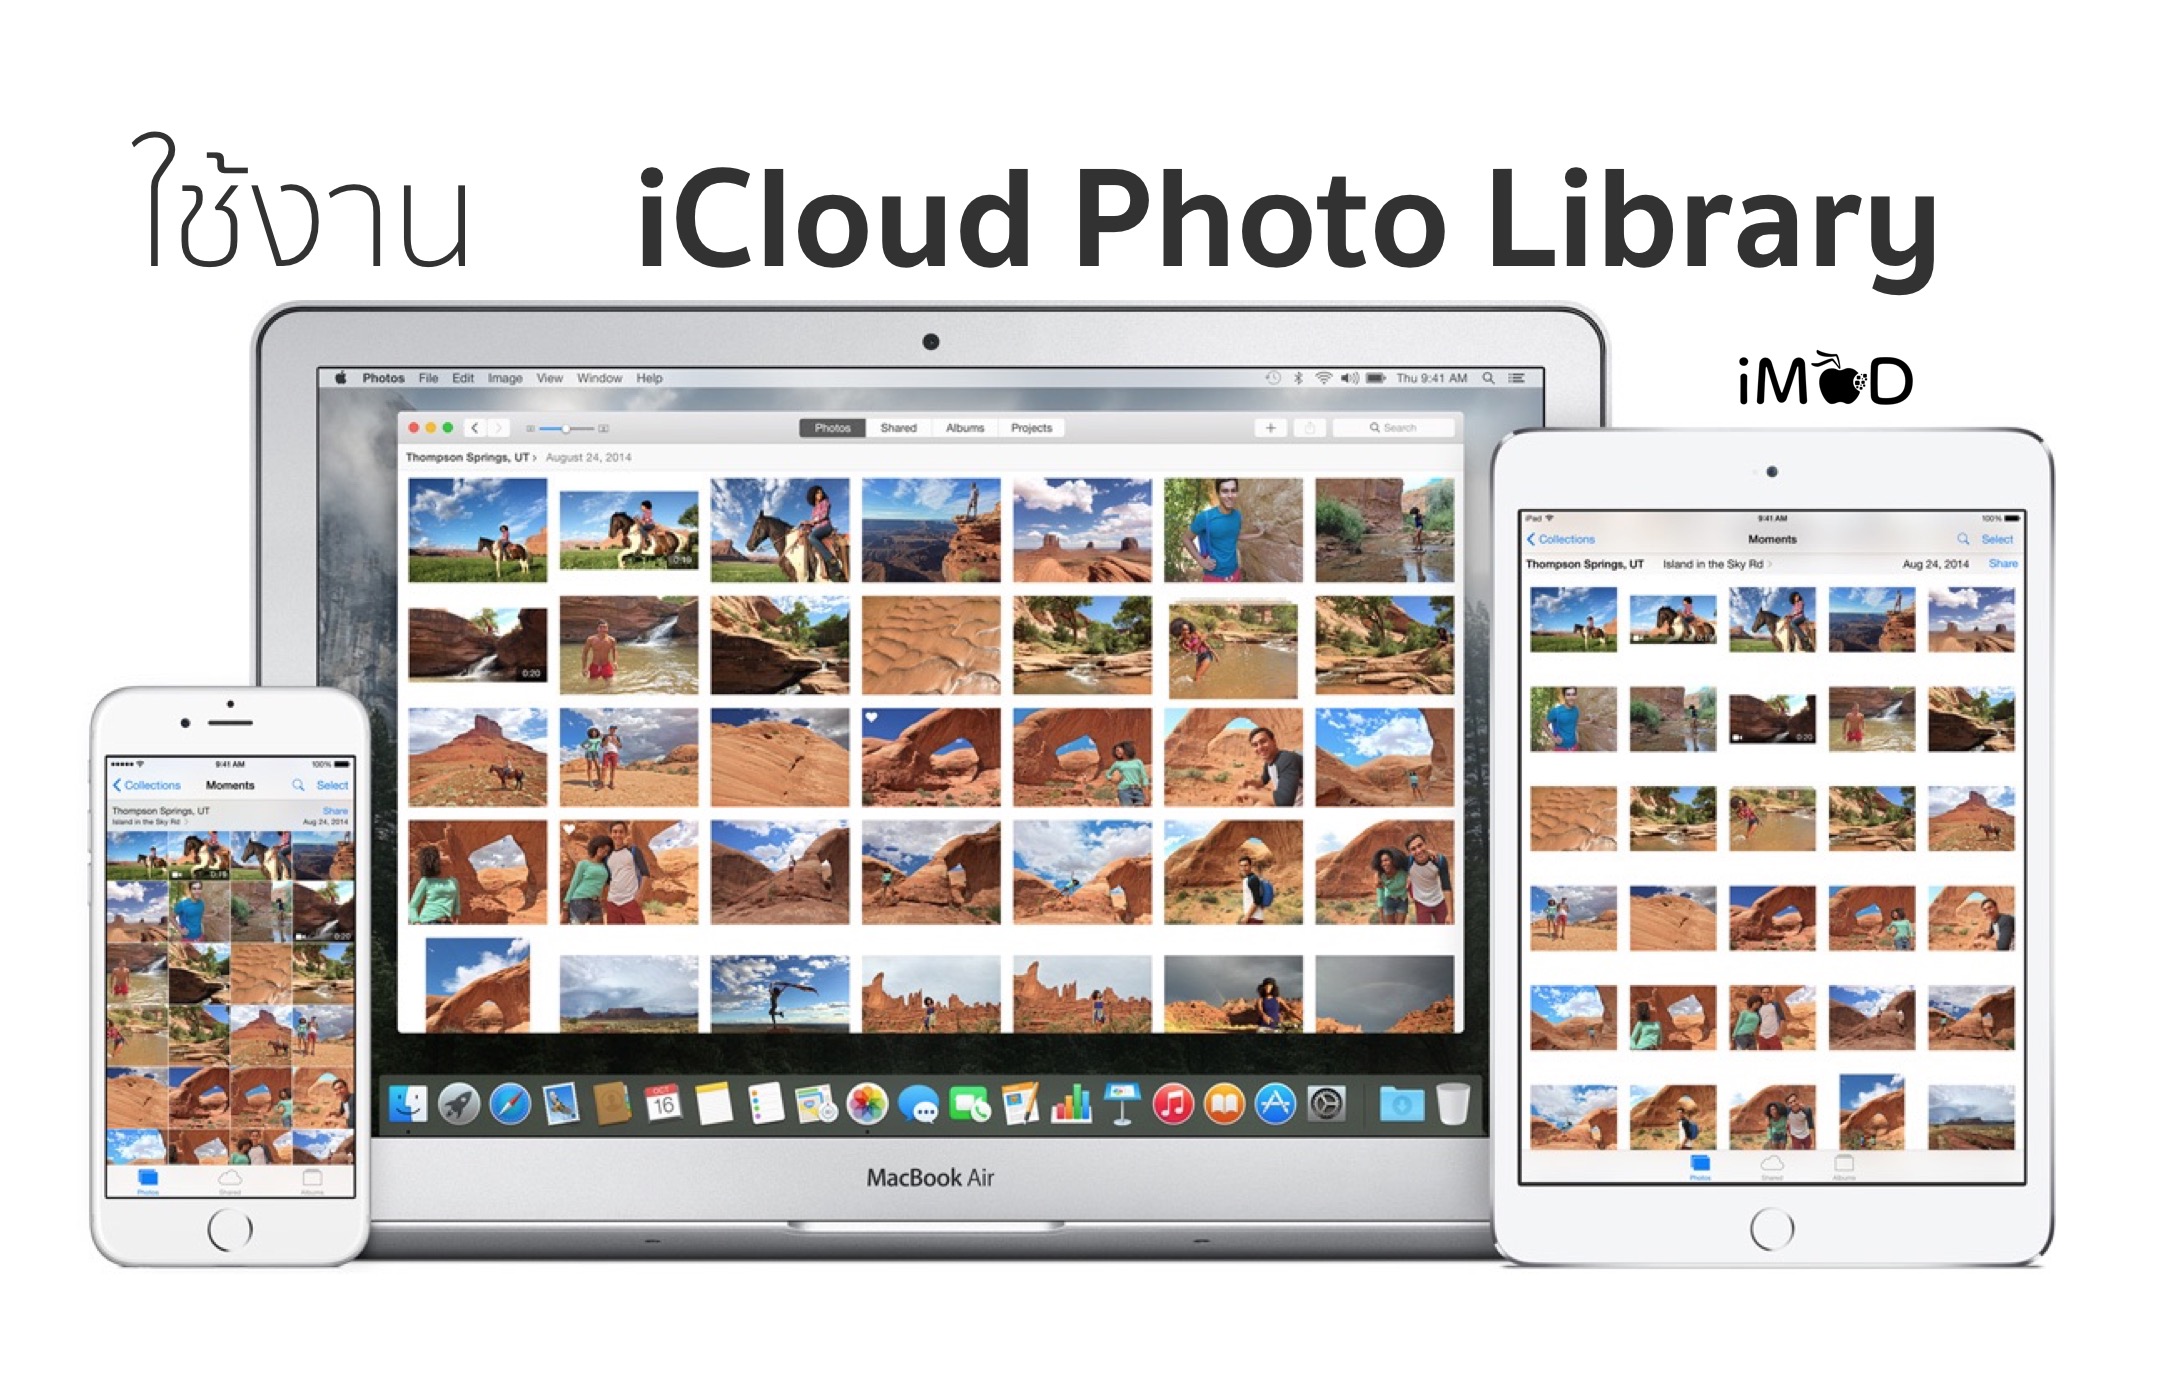 photos for mac repair your library